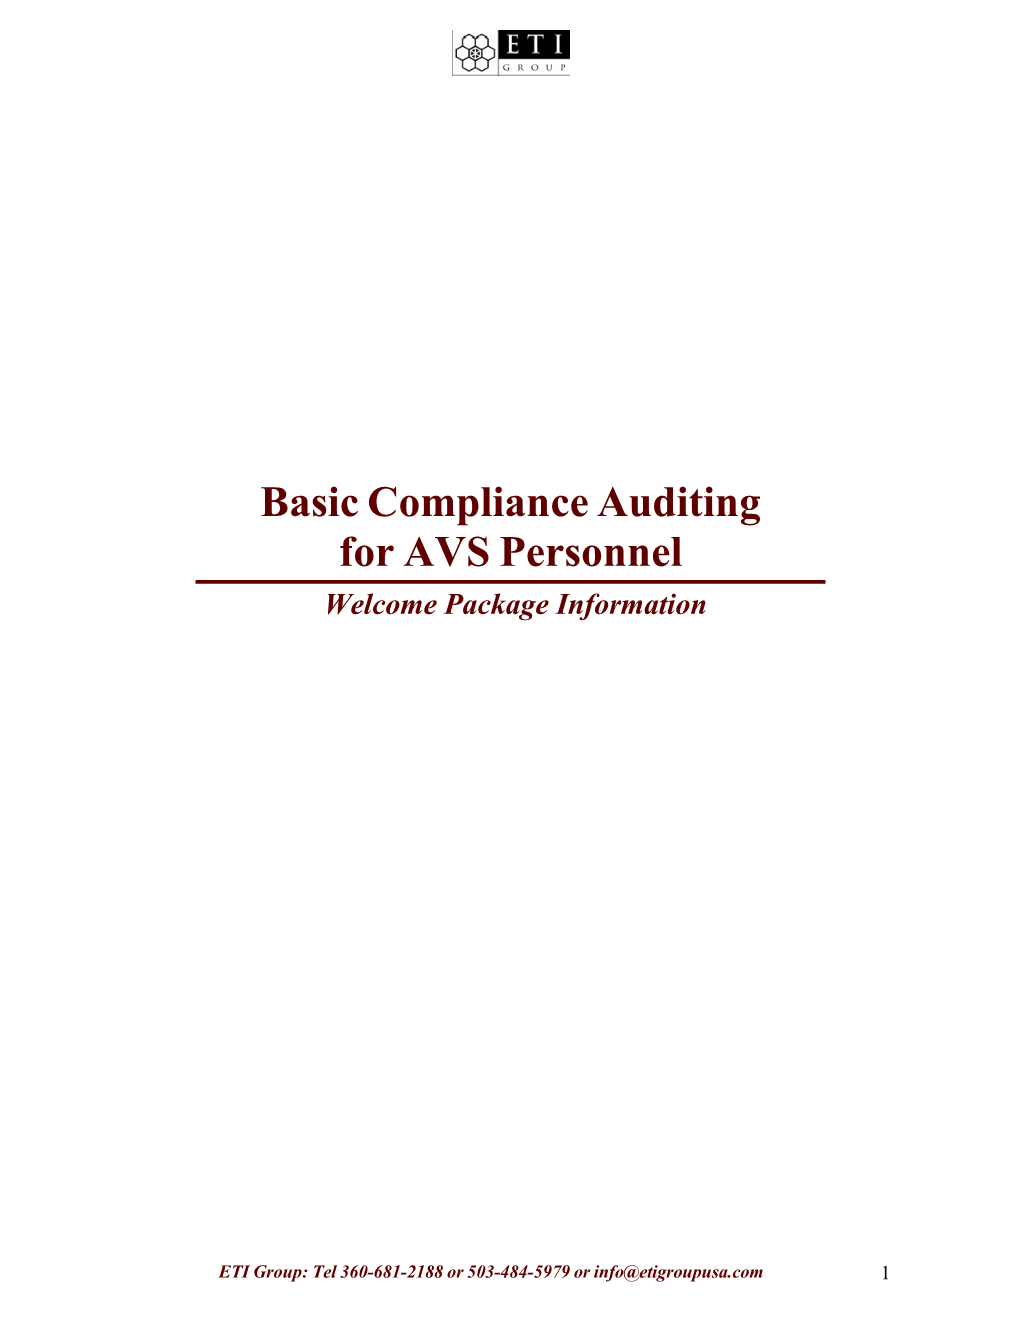 Basic Compliance Auditing for AVS Personnel Welcome Package